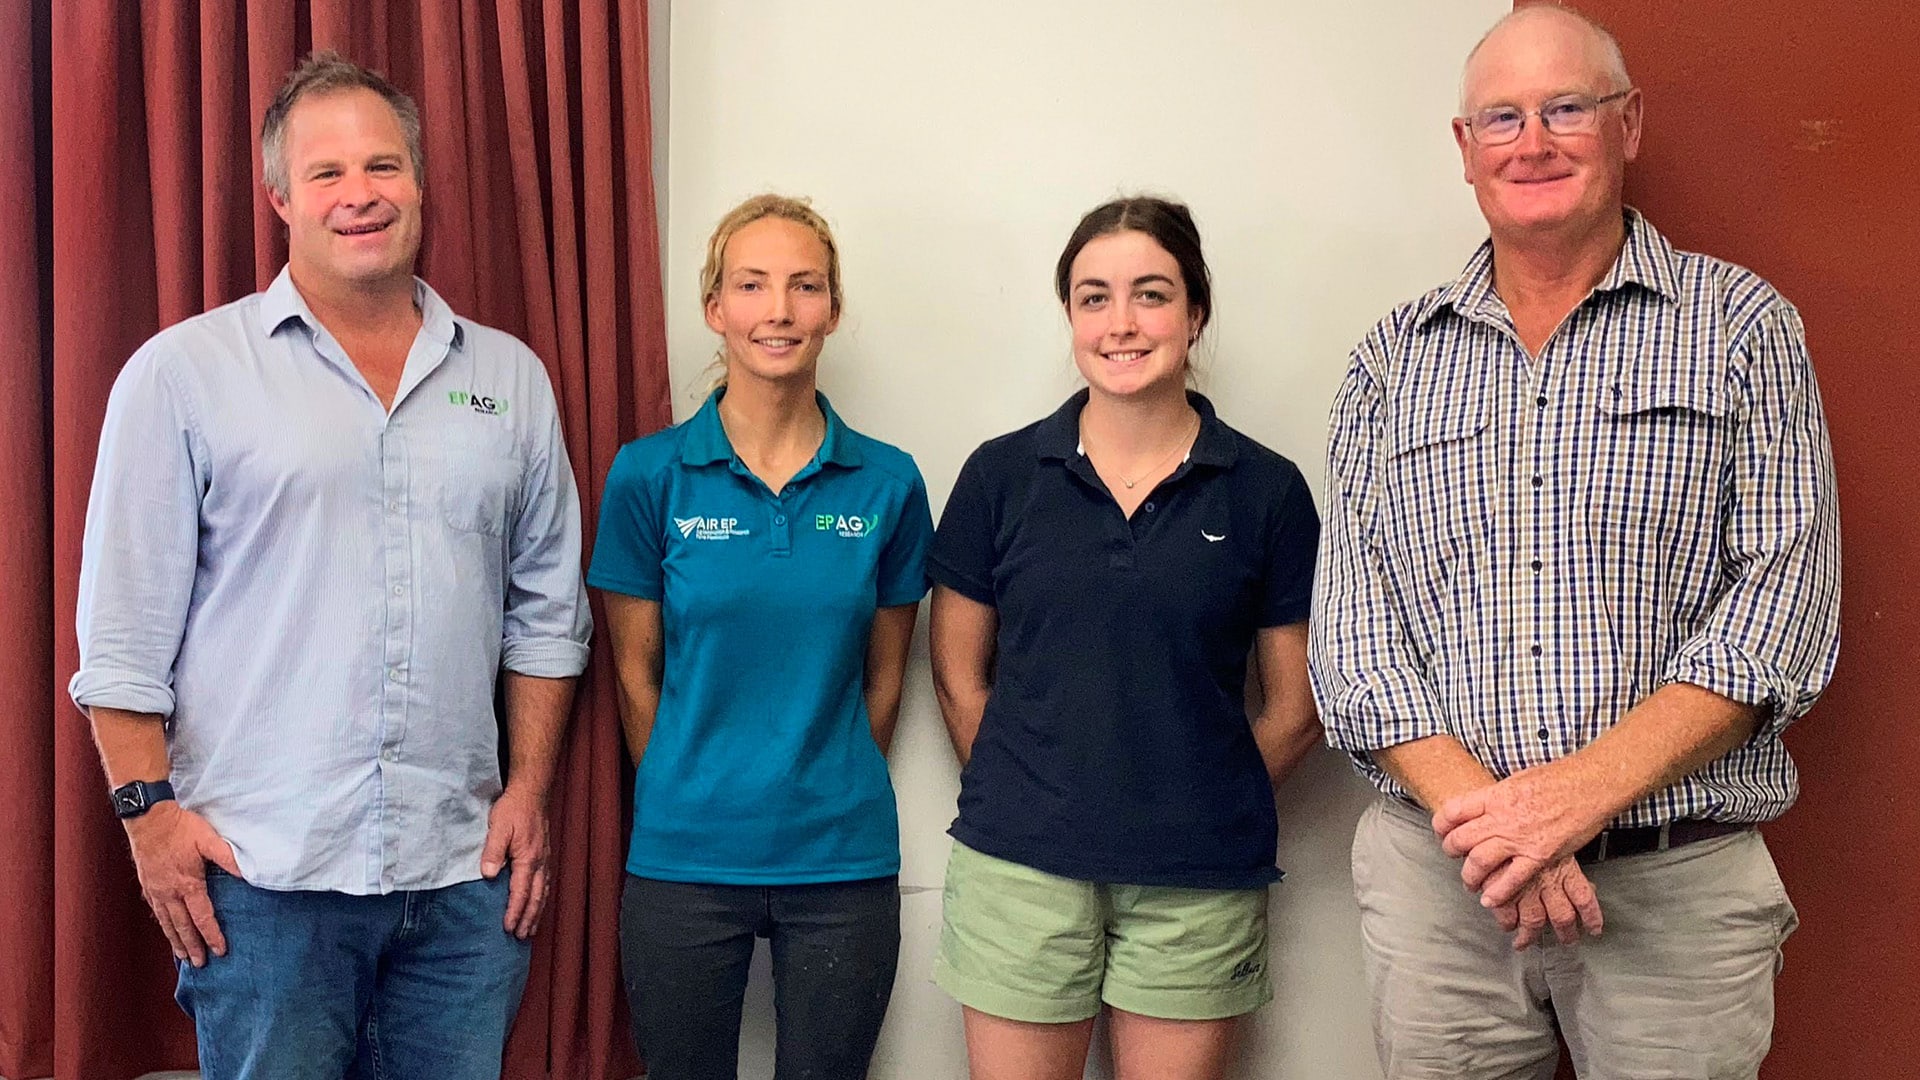 Eyre Peninsula internships in grains research (EP120)